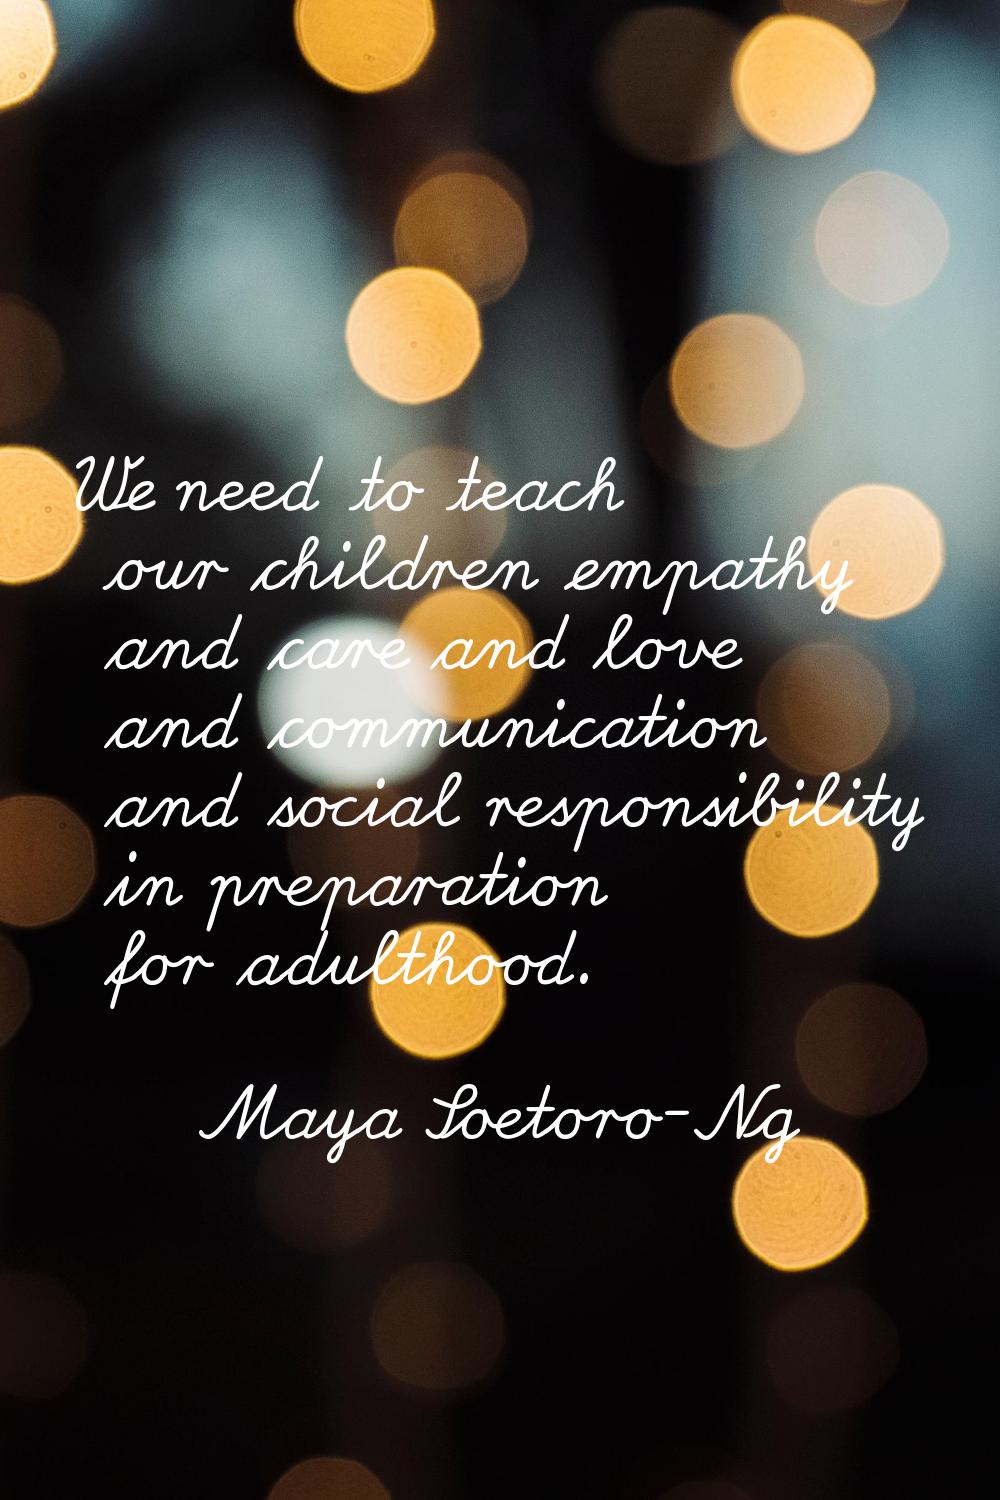 We need to teach our children empathy and care and love and communication and social responsibility